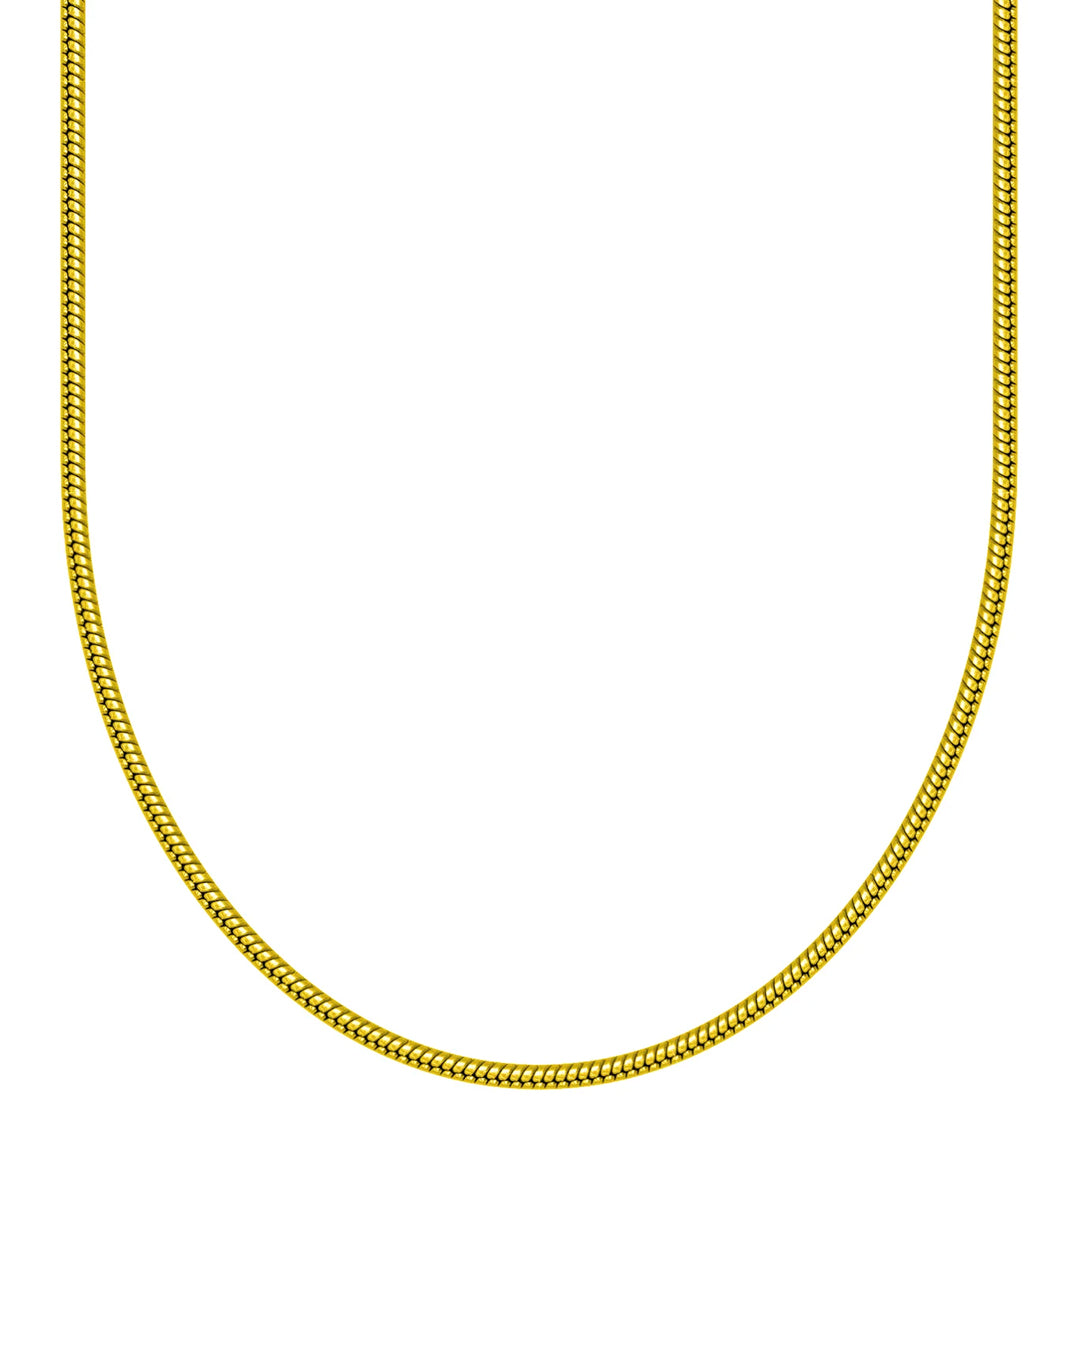 Snake Chain 2mm (Gold)